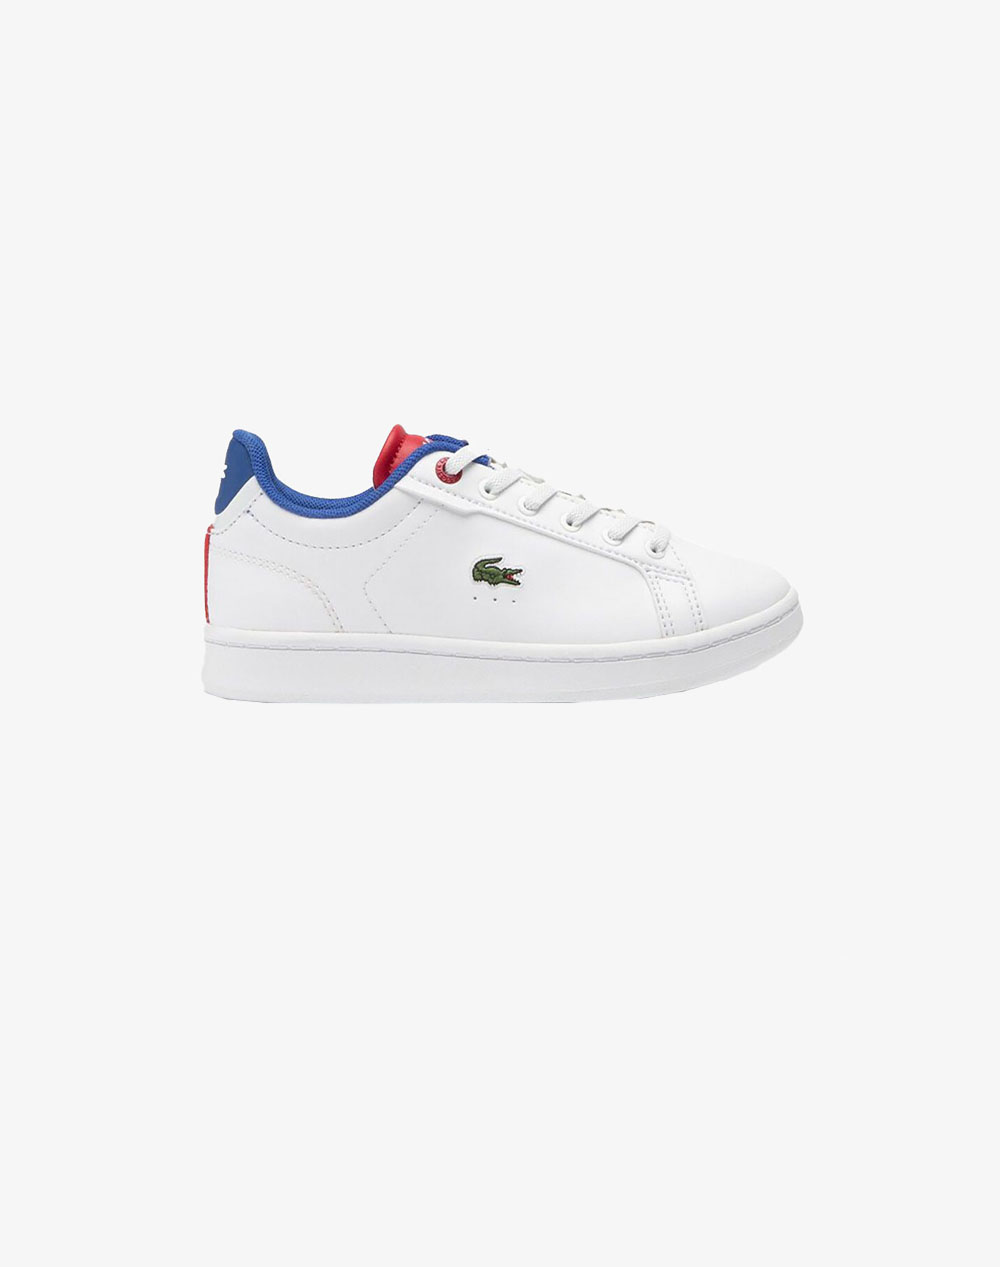 LACOSTE ΠΑΠΟΥΤΣΙΑ ΠΑΙΔΙΚΑ CARNABY PRO 124 2 SUI 37-47SUI00085T9-0000 White 3832BLACO6040074_5344